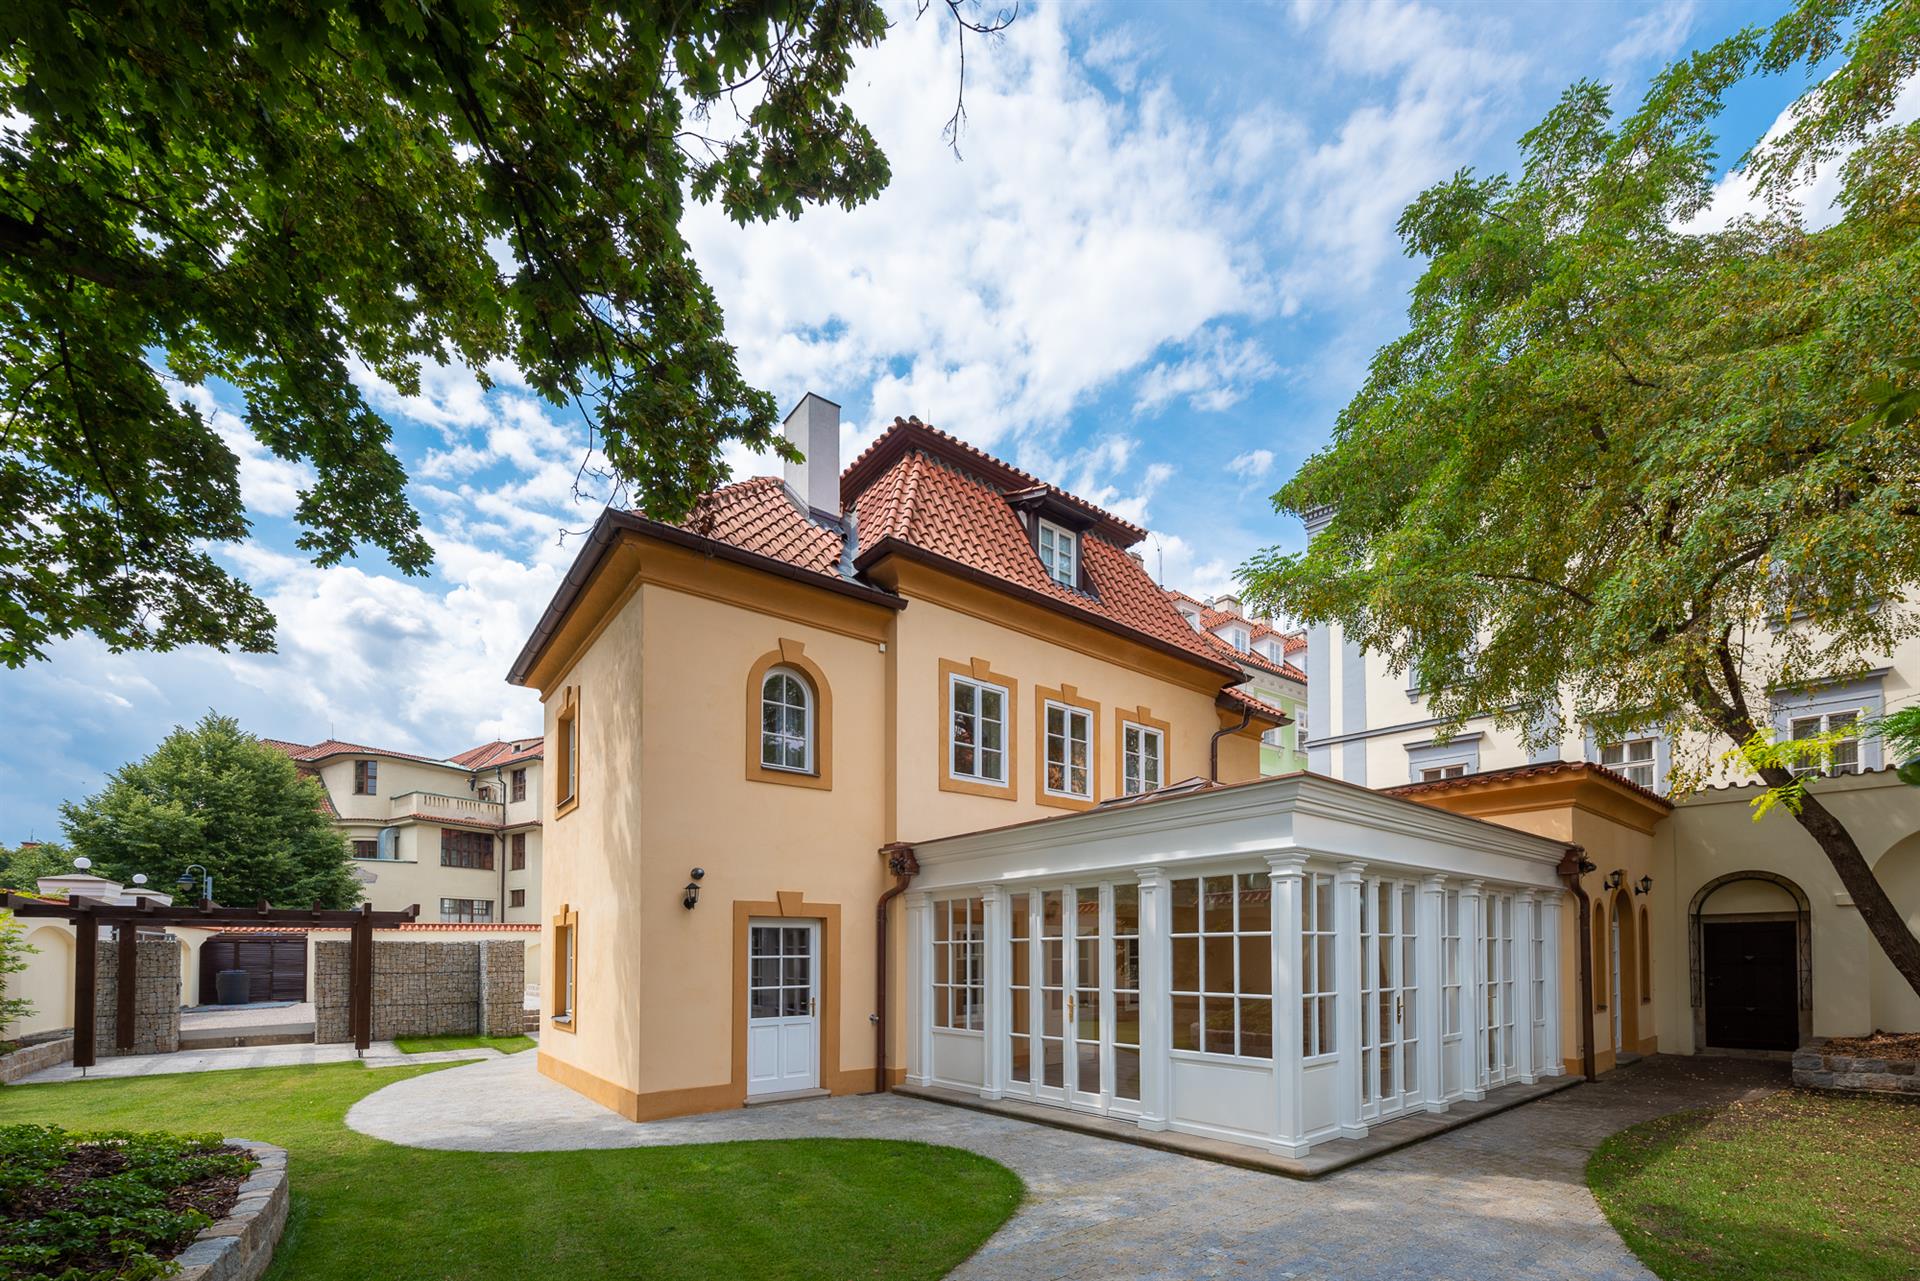 Prague Real Estate and Apartments for Sale Christie's International